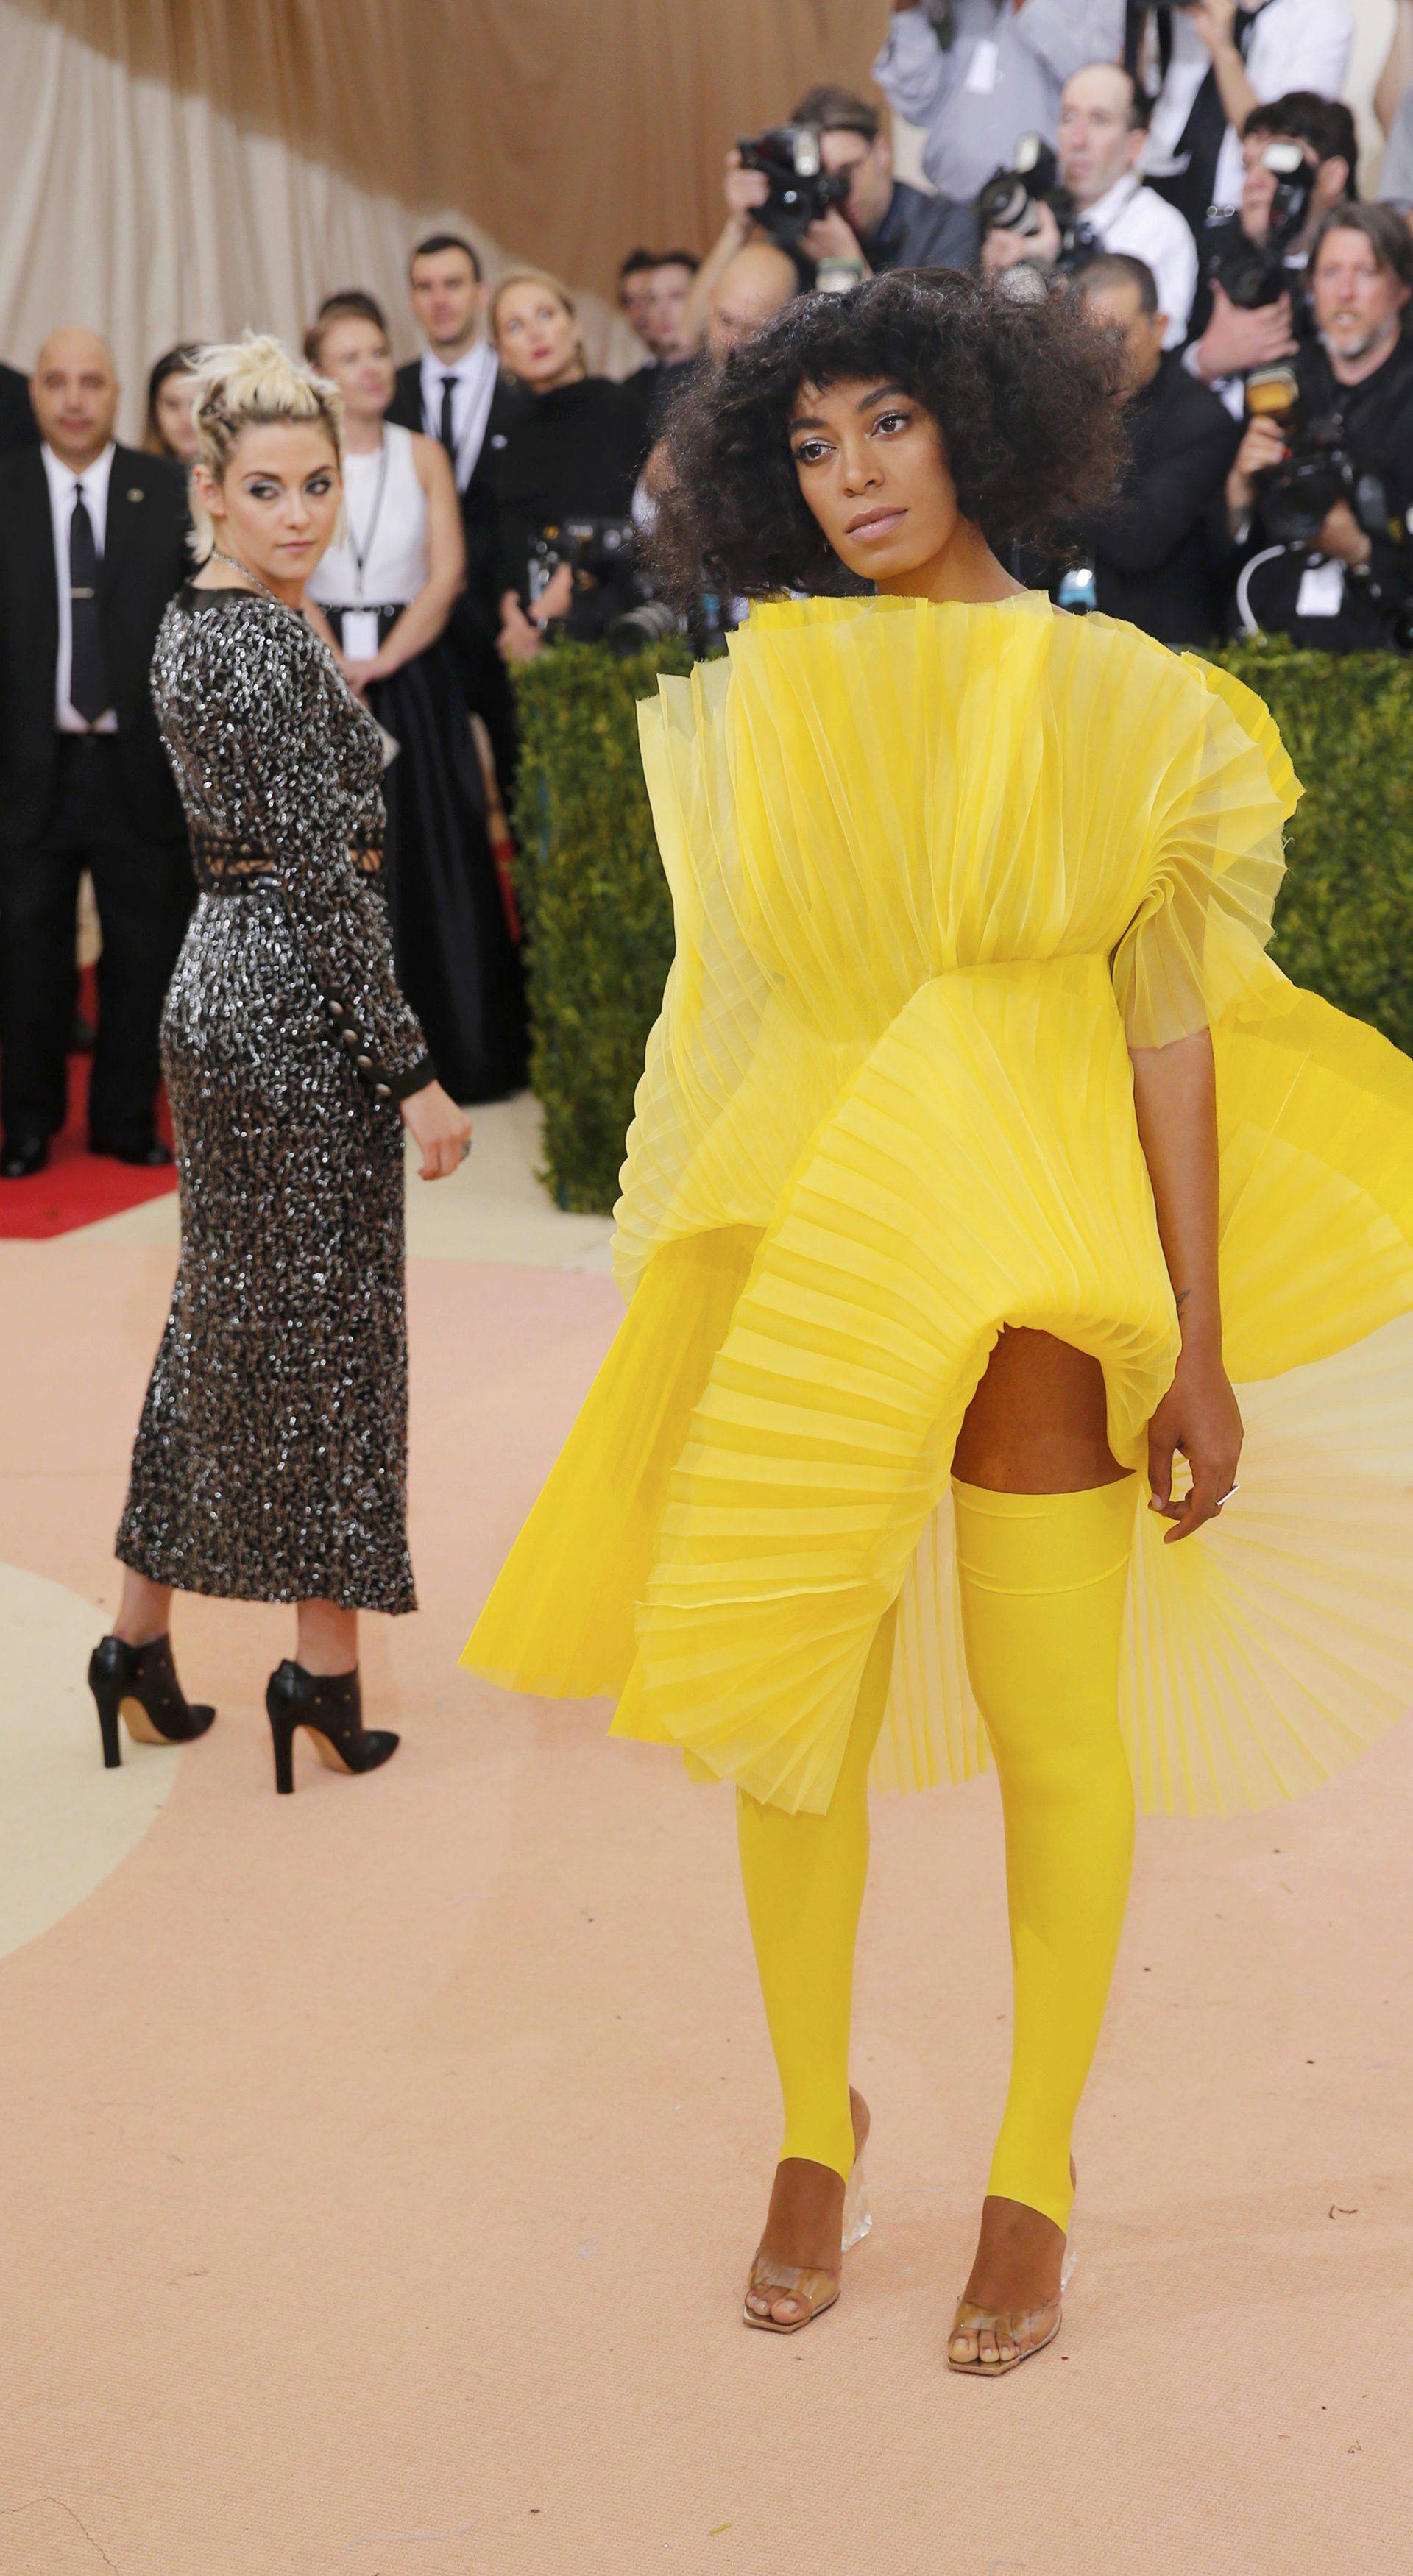 Singer Knowles and Actress Stewart arrive at the Met Gala in New York